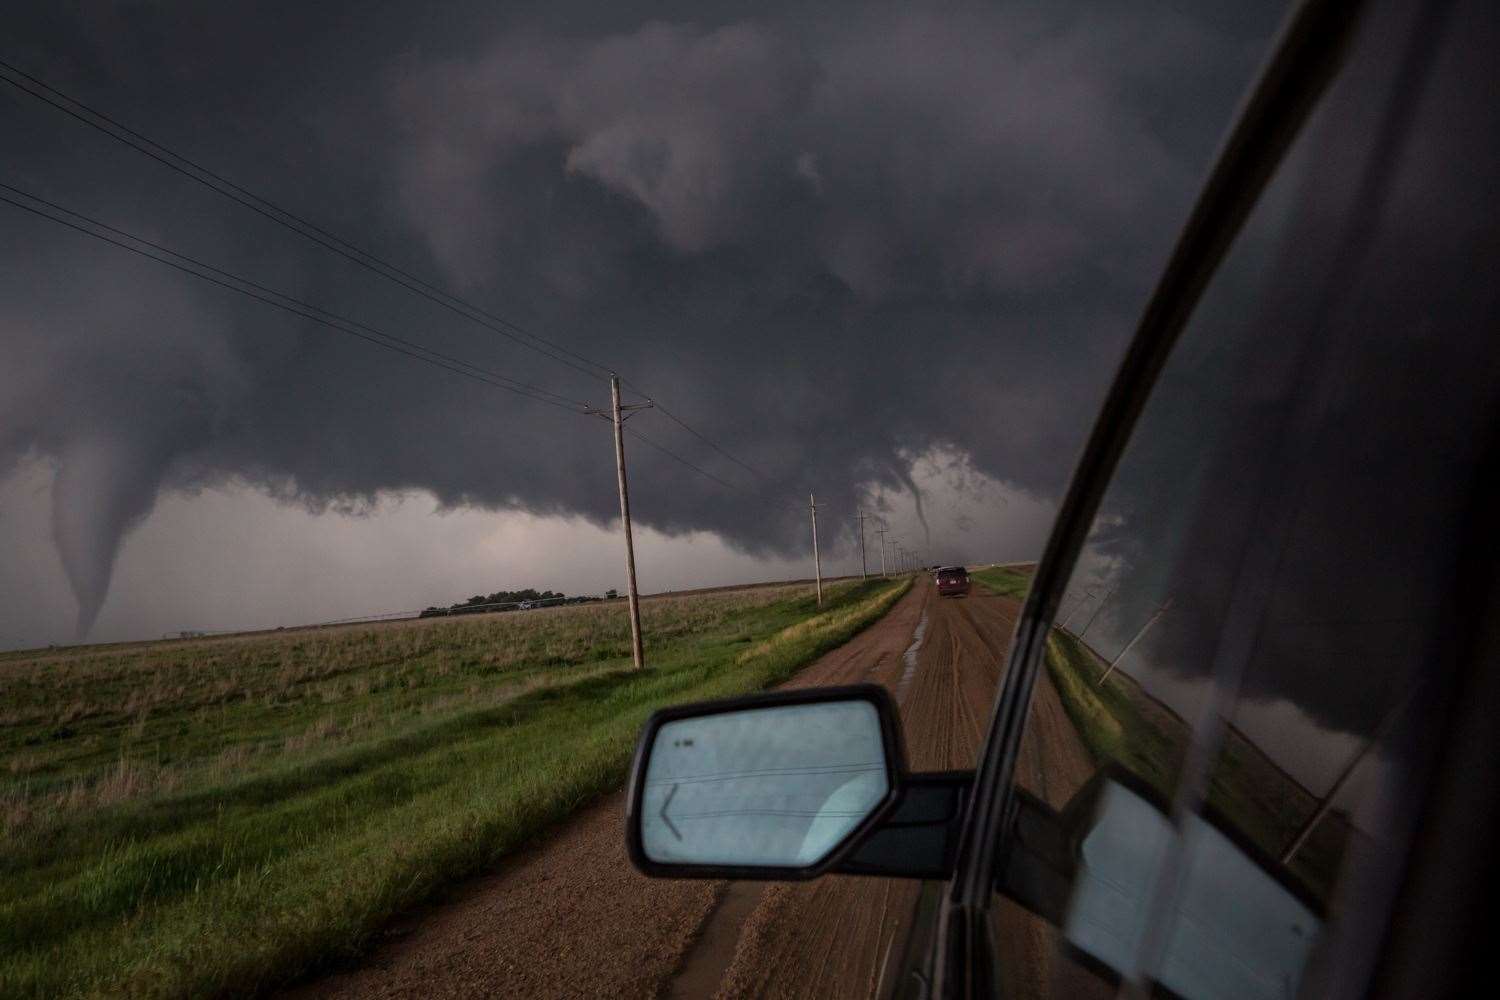 He captured this image of a tornado hitting the ground in three places while in Dodge City USA on May 24 2016. Pictures David Christie of Crystal Memories